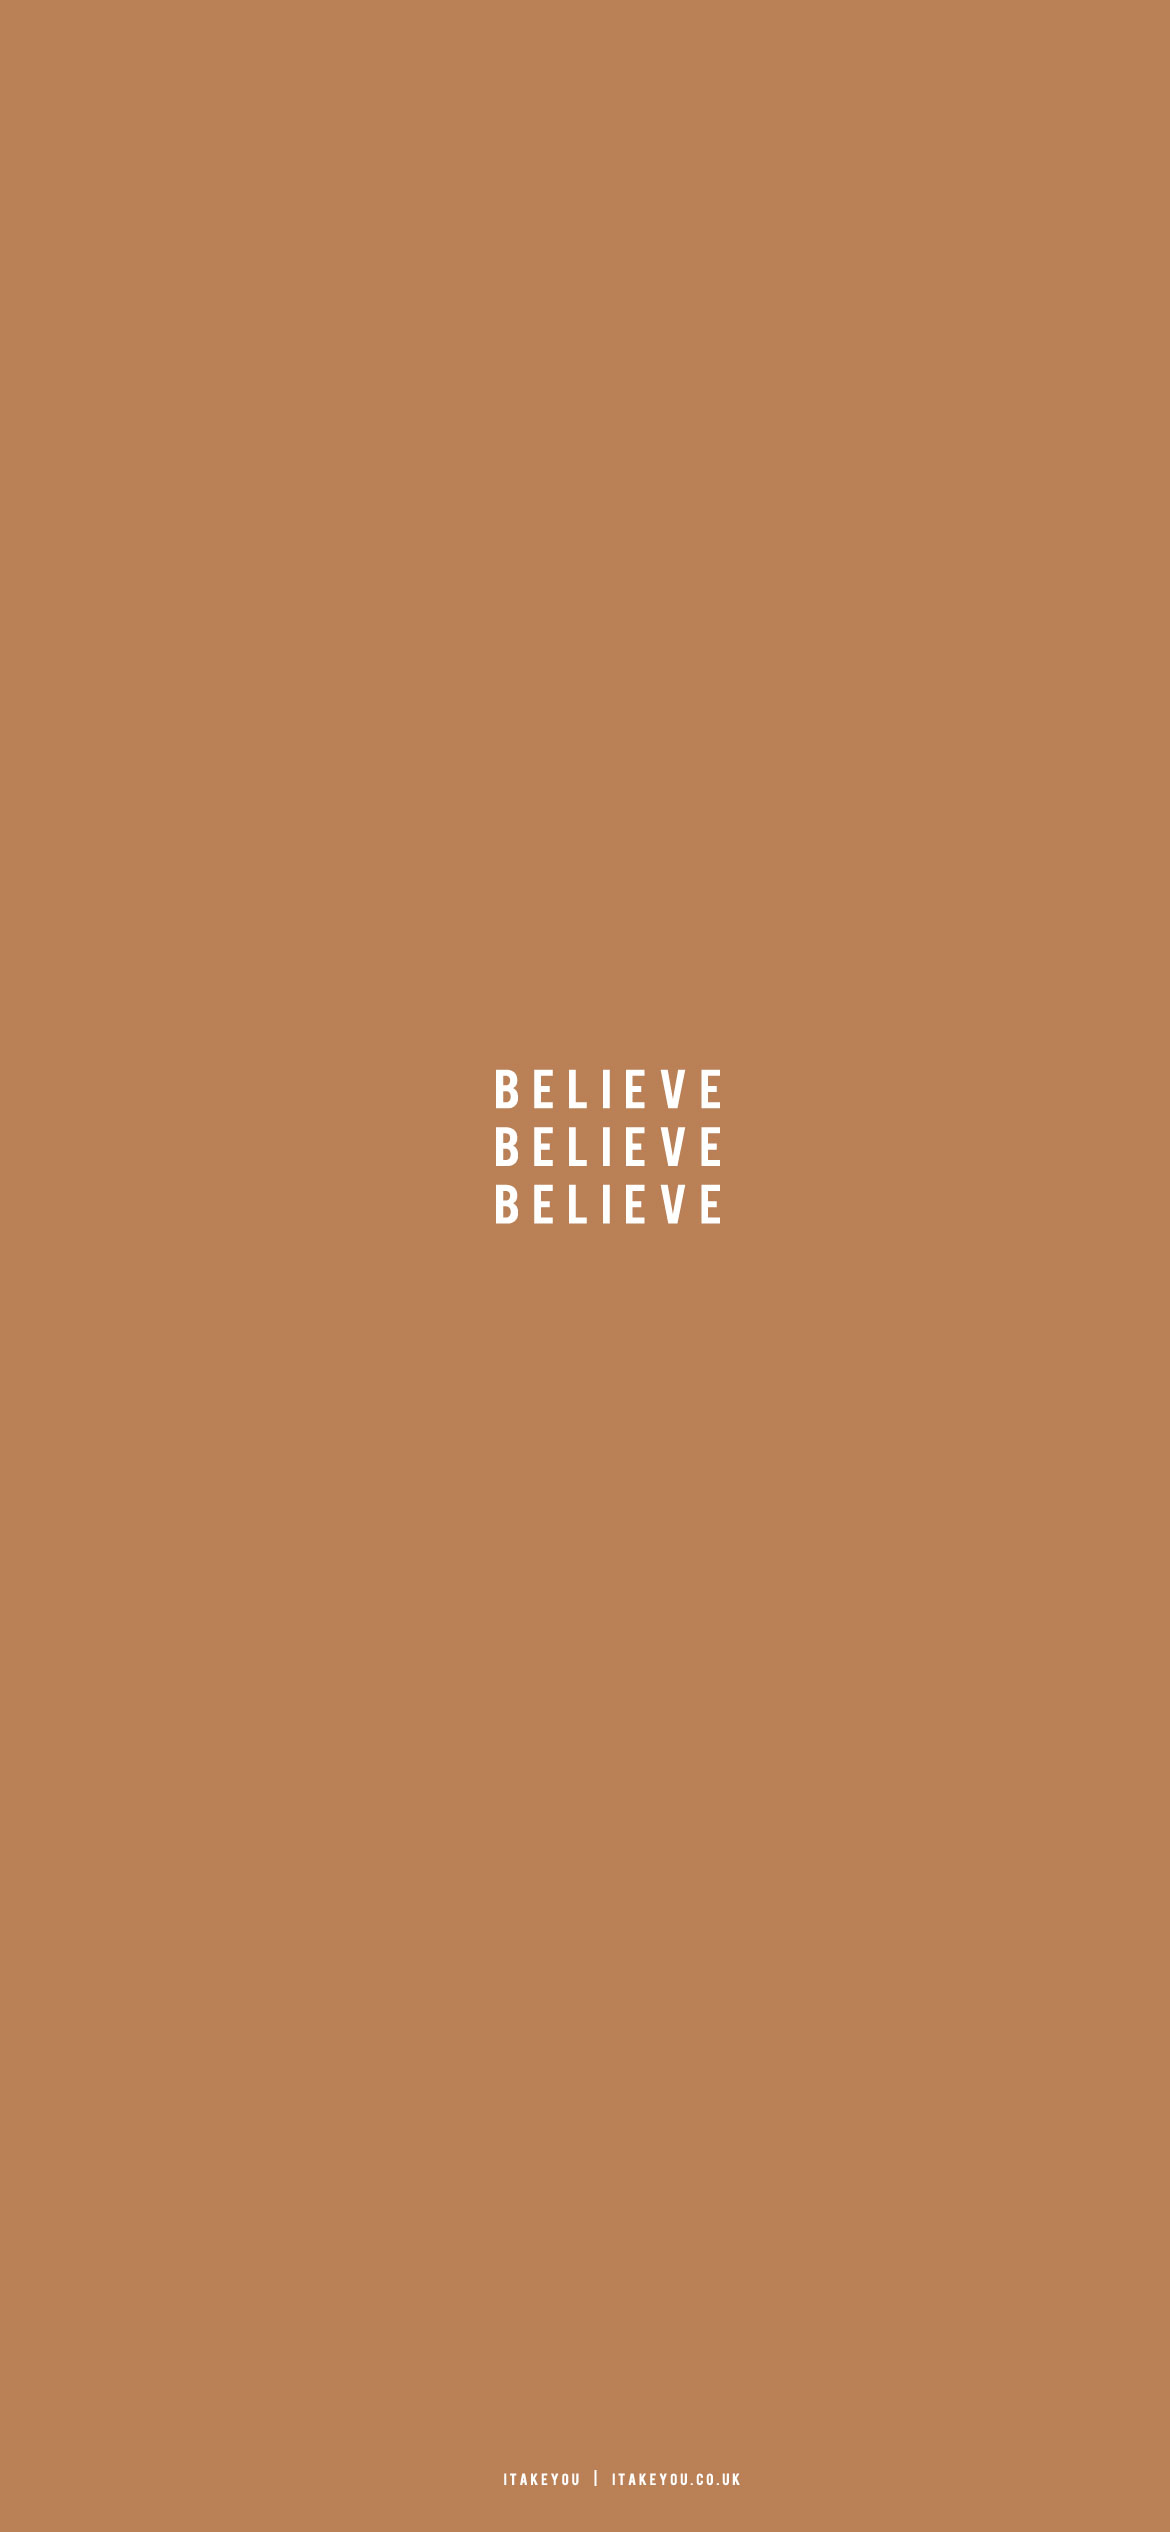 500+ Believe Pictures | Download Free Images on Unsplash